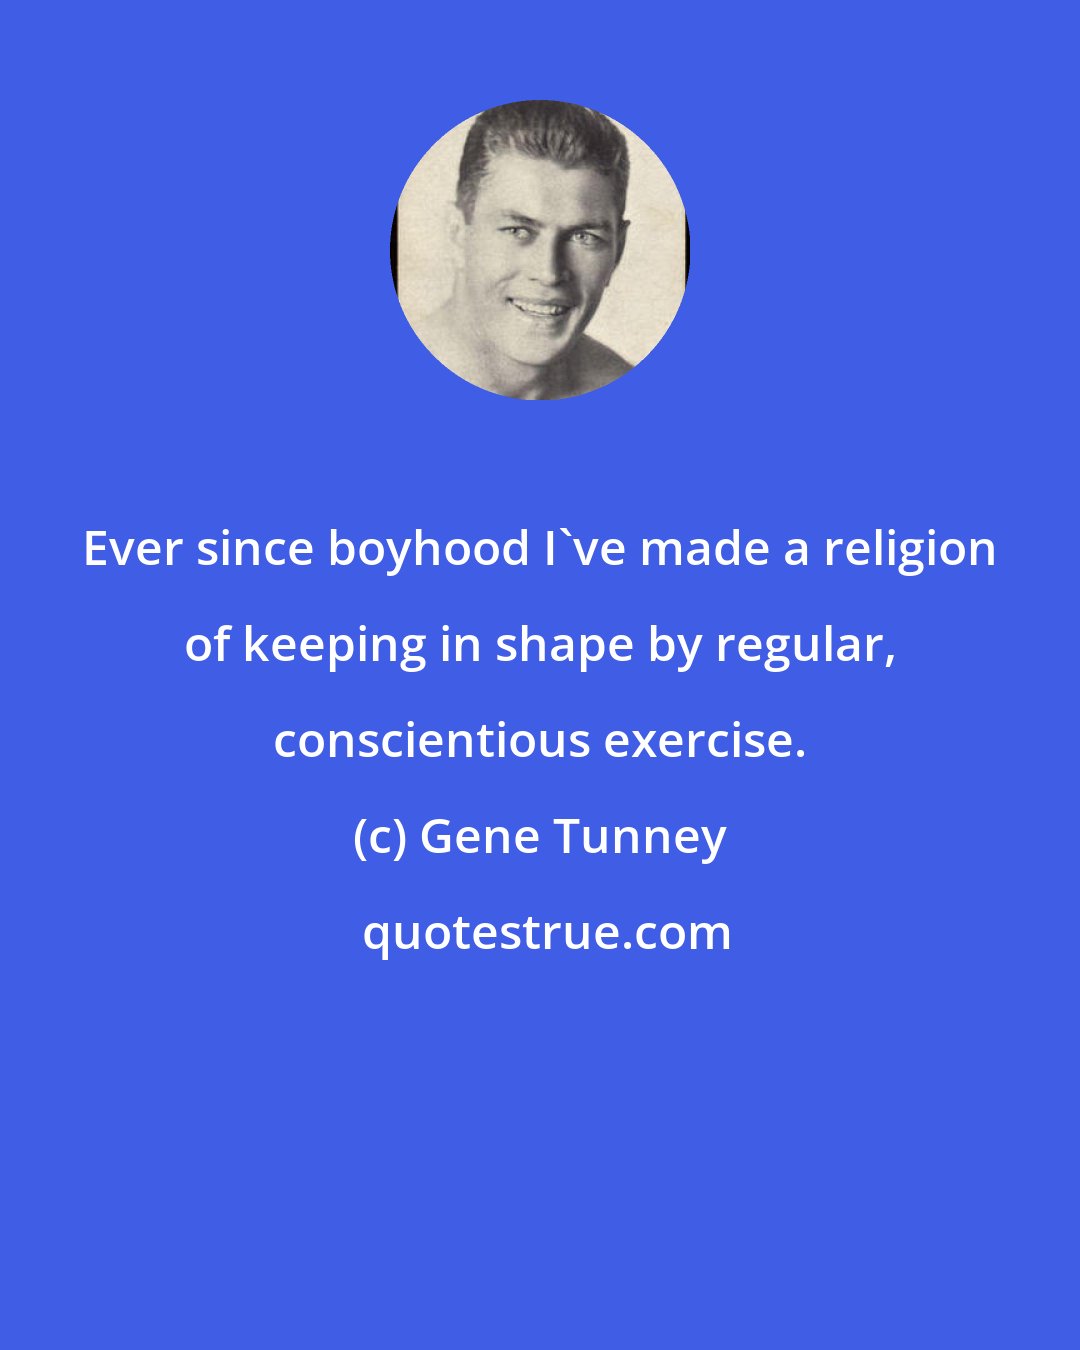 Gene Tunney: Ever since boyhood I've made a religion of keeping in shape by regular, conscientious exercise.